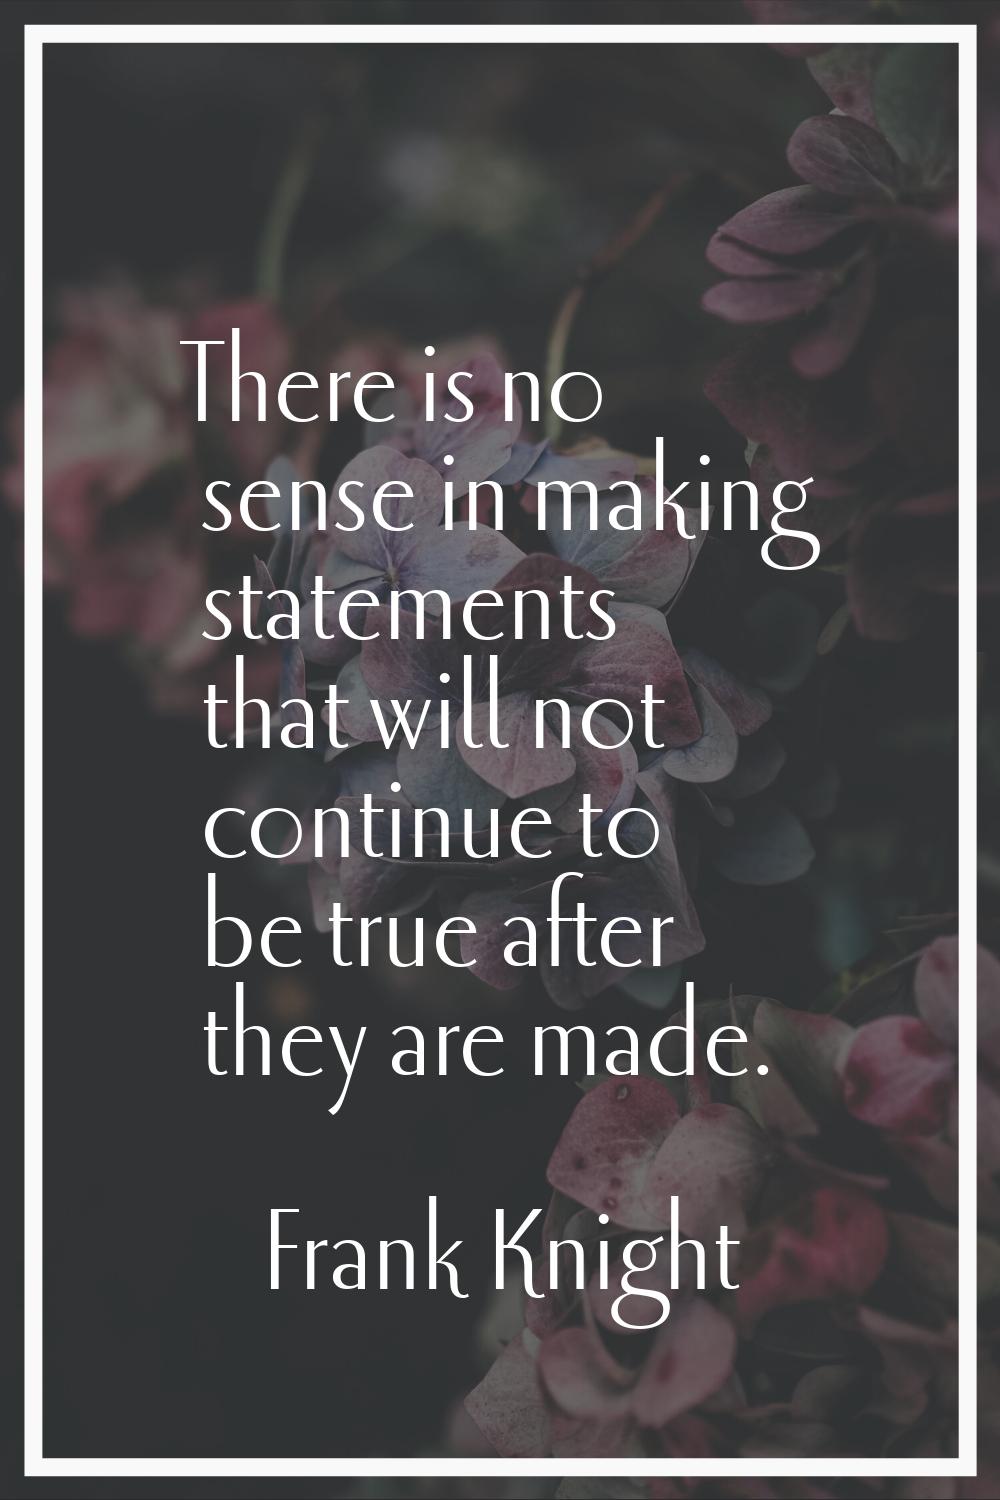 There is no sense in making statements that will not continue to be true after they are made.